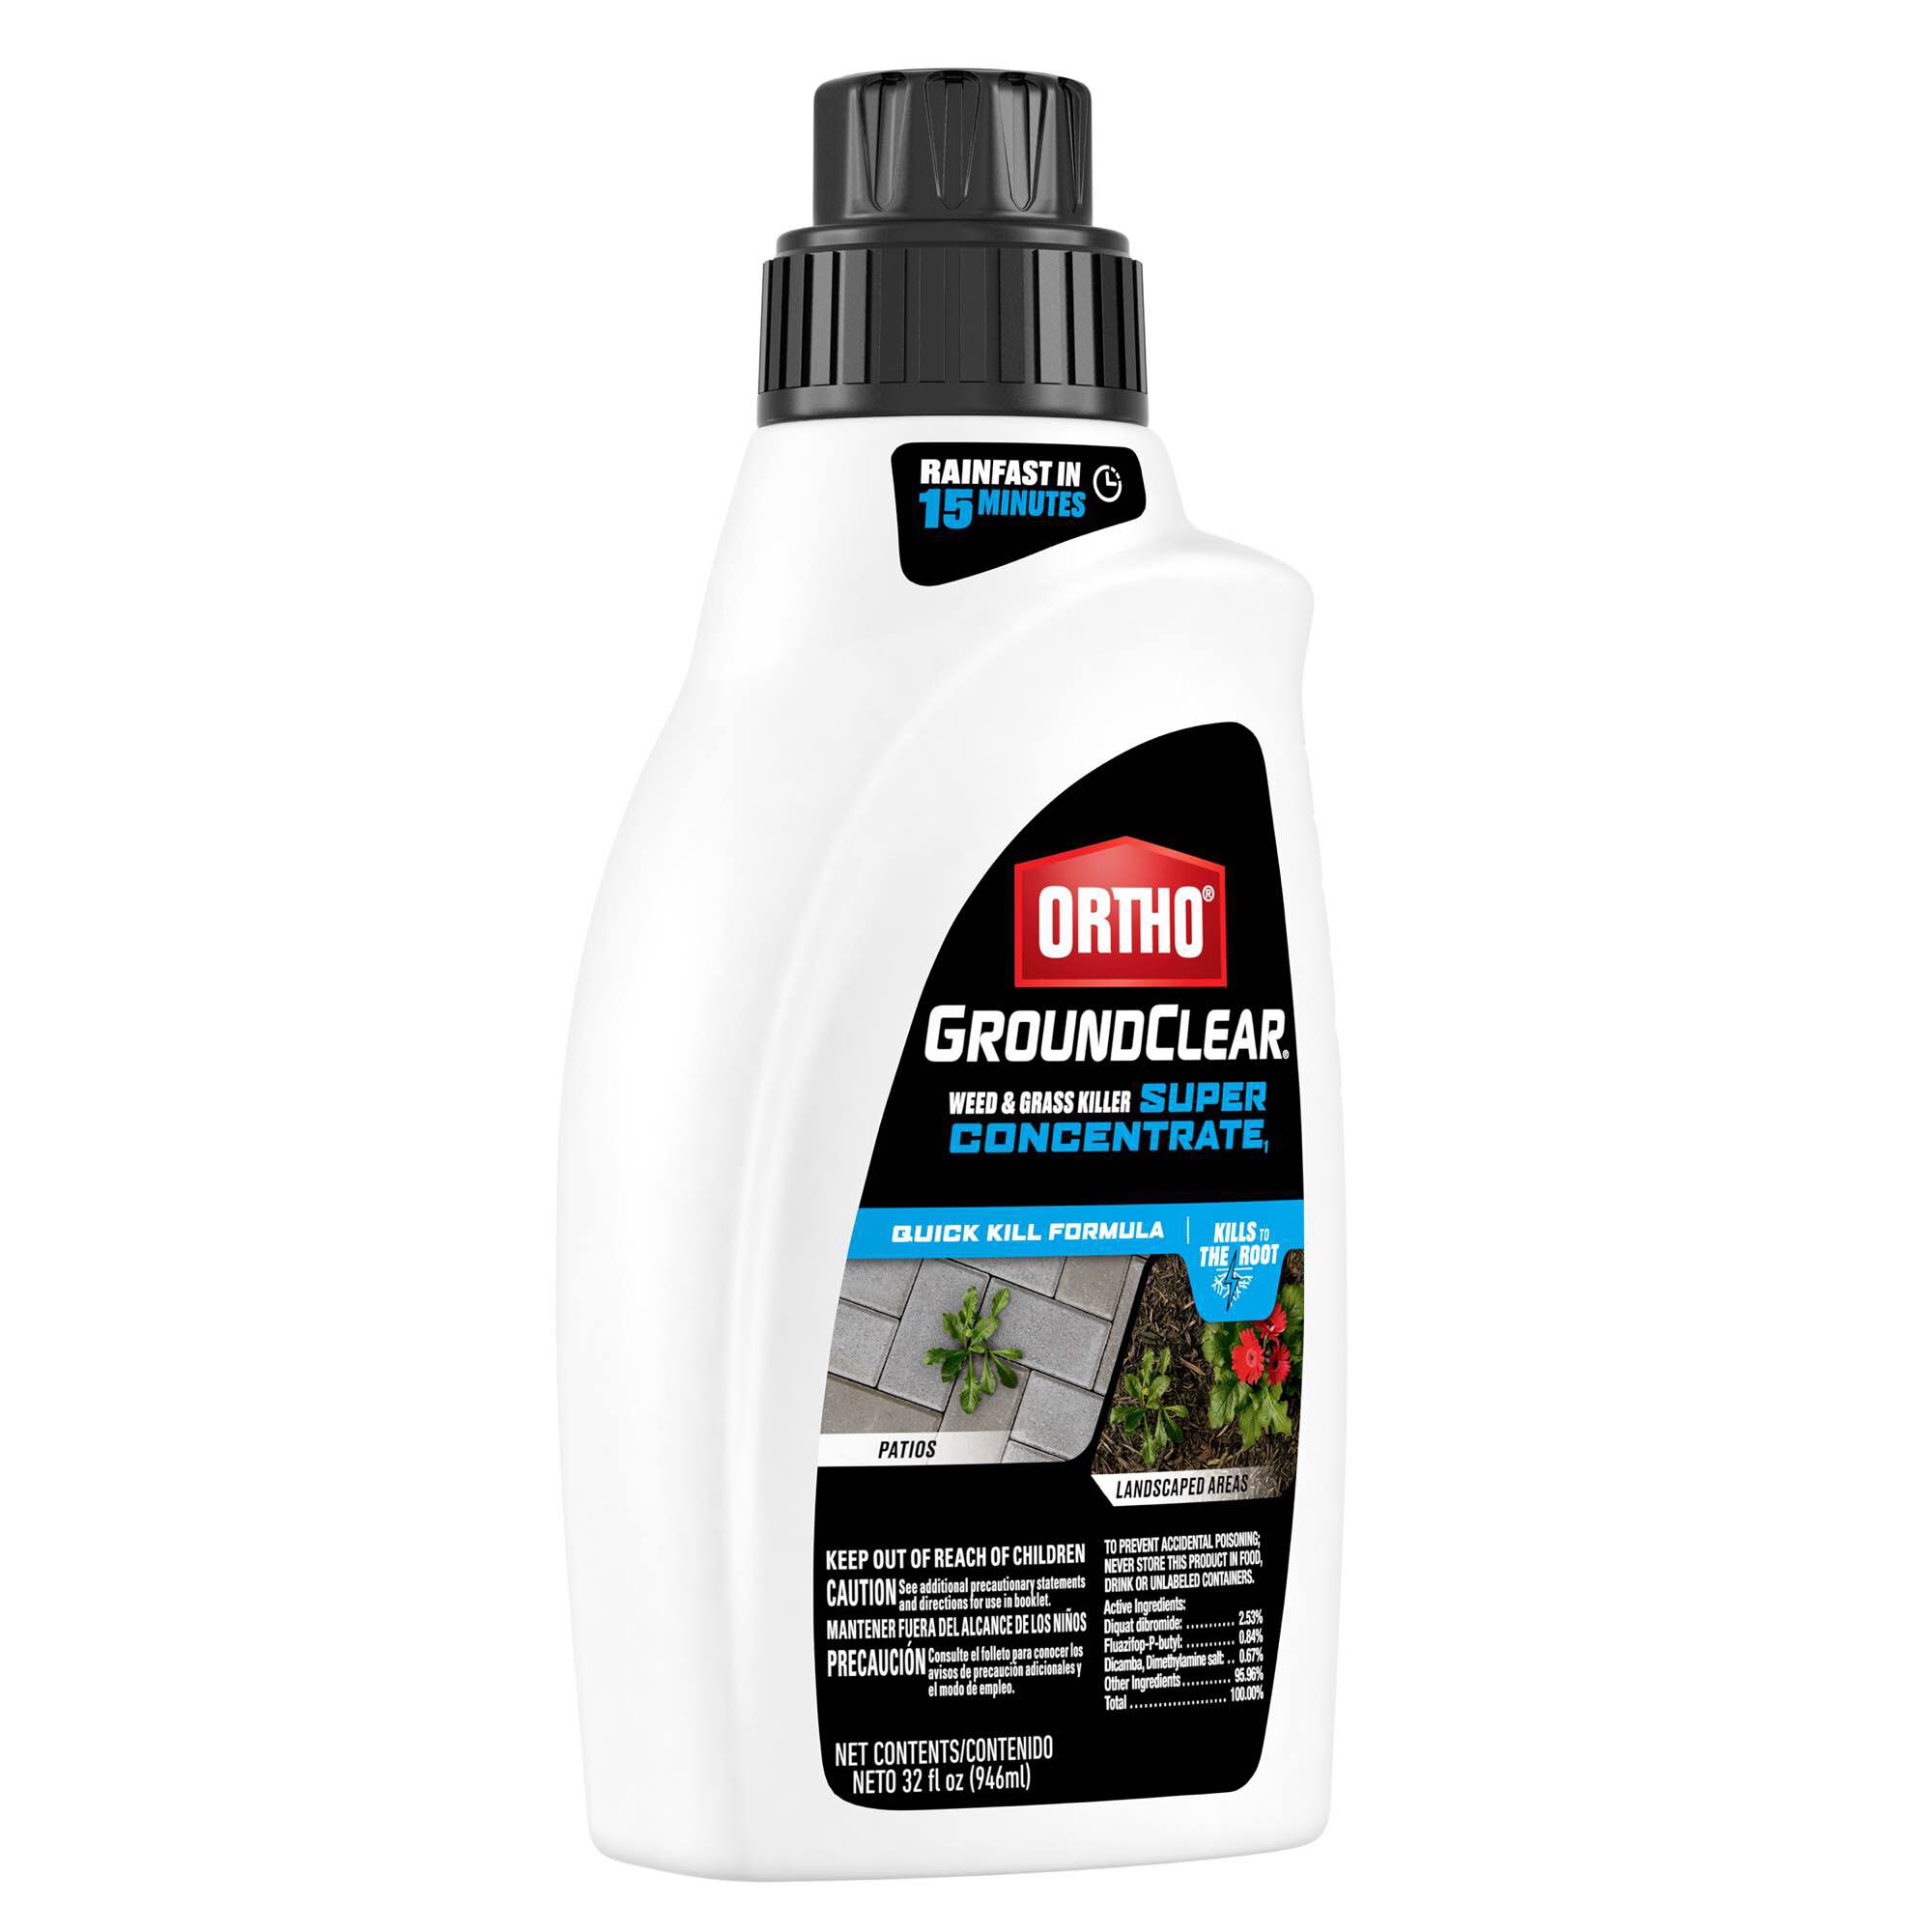 Image of Ortho GroundClear Weed and Grass Killer - Application Instructions